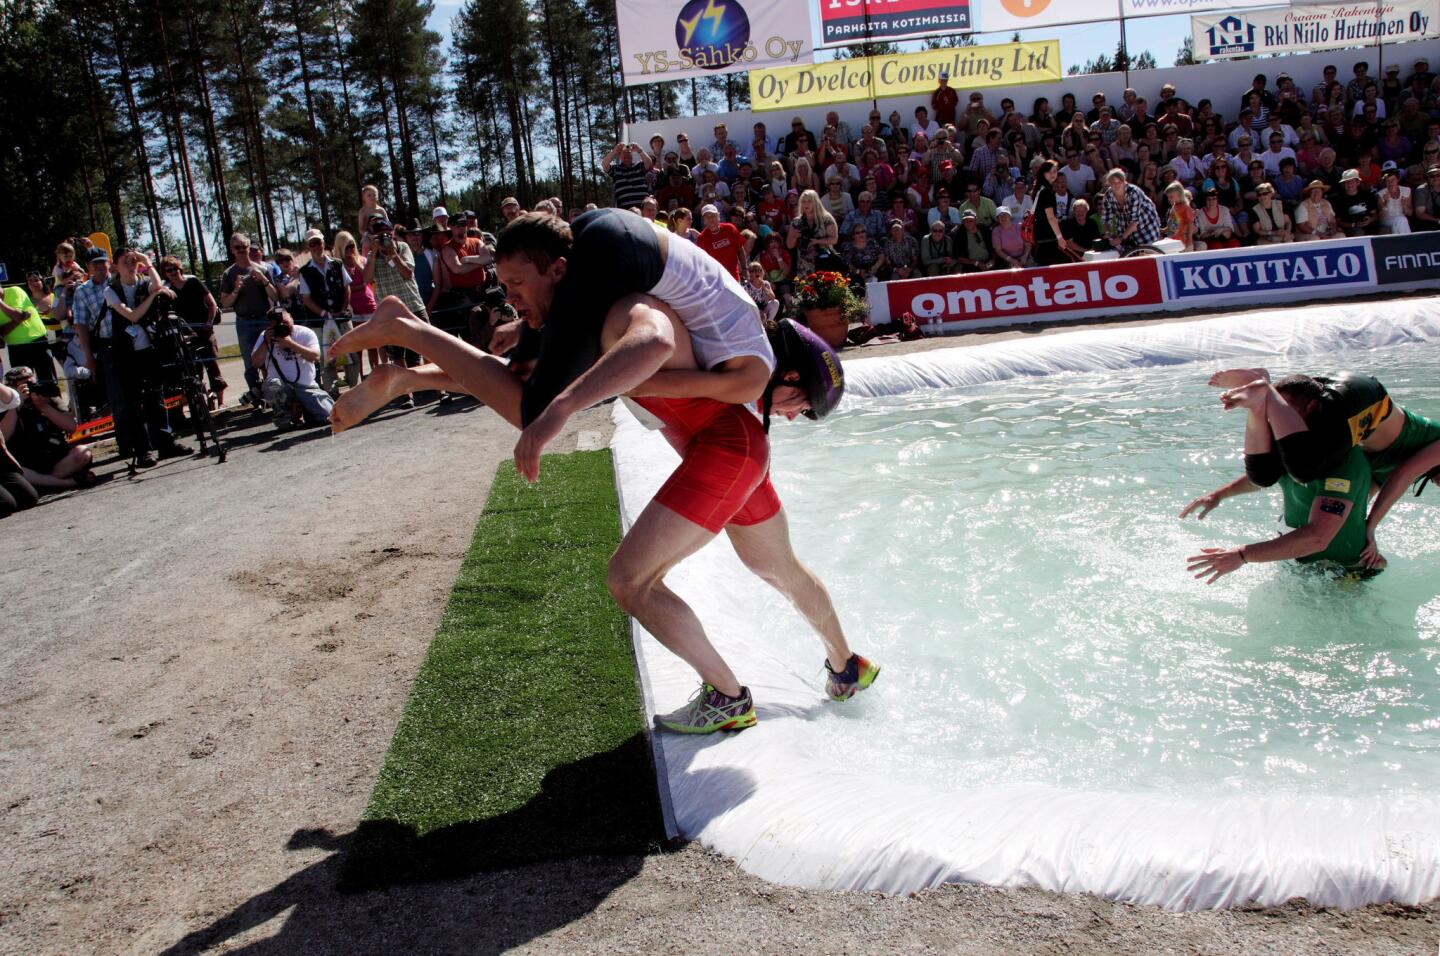 Wife Carrying World Championships, Sonkajarvi, Finland